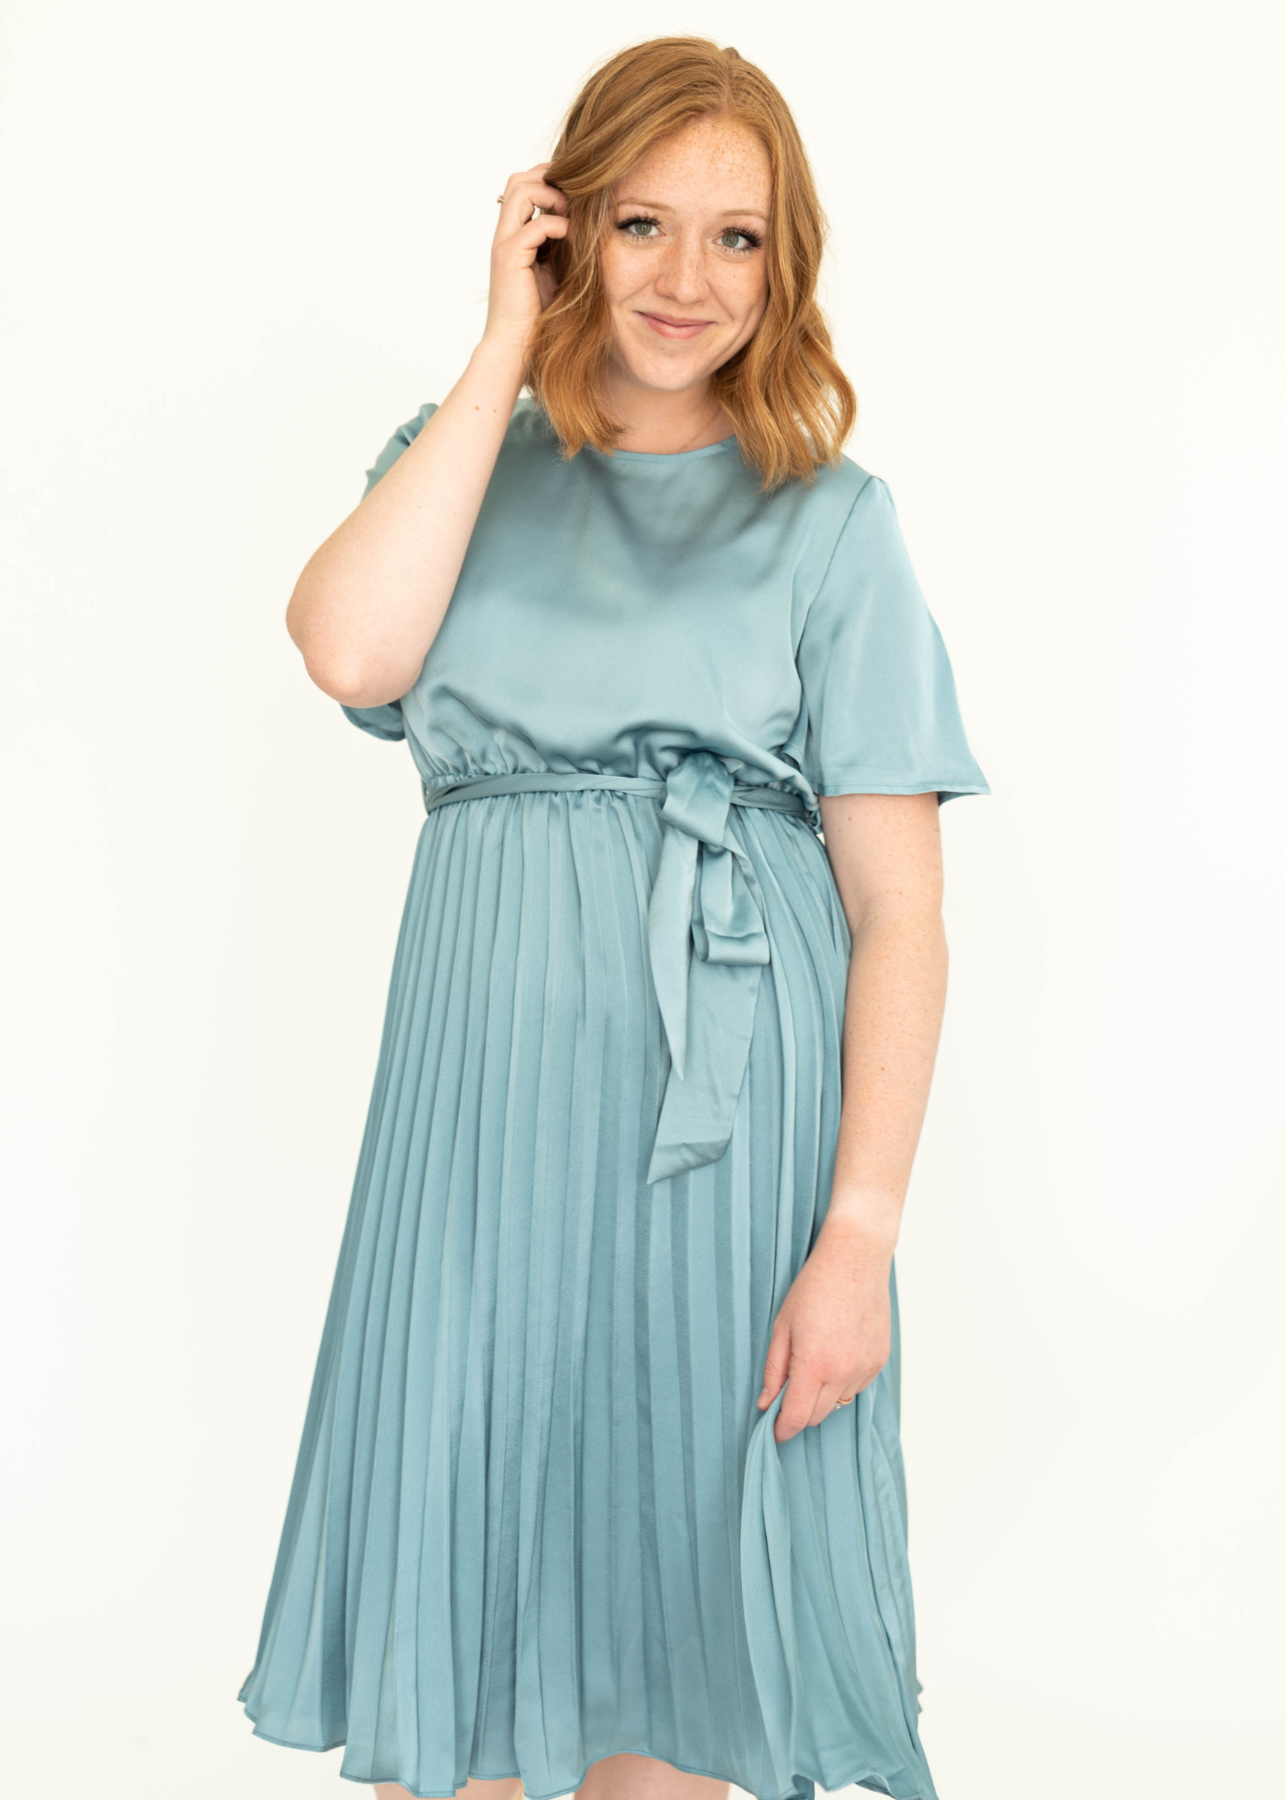 French blue short sleeve satin dress with pleated skirt